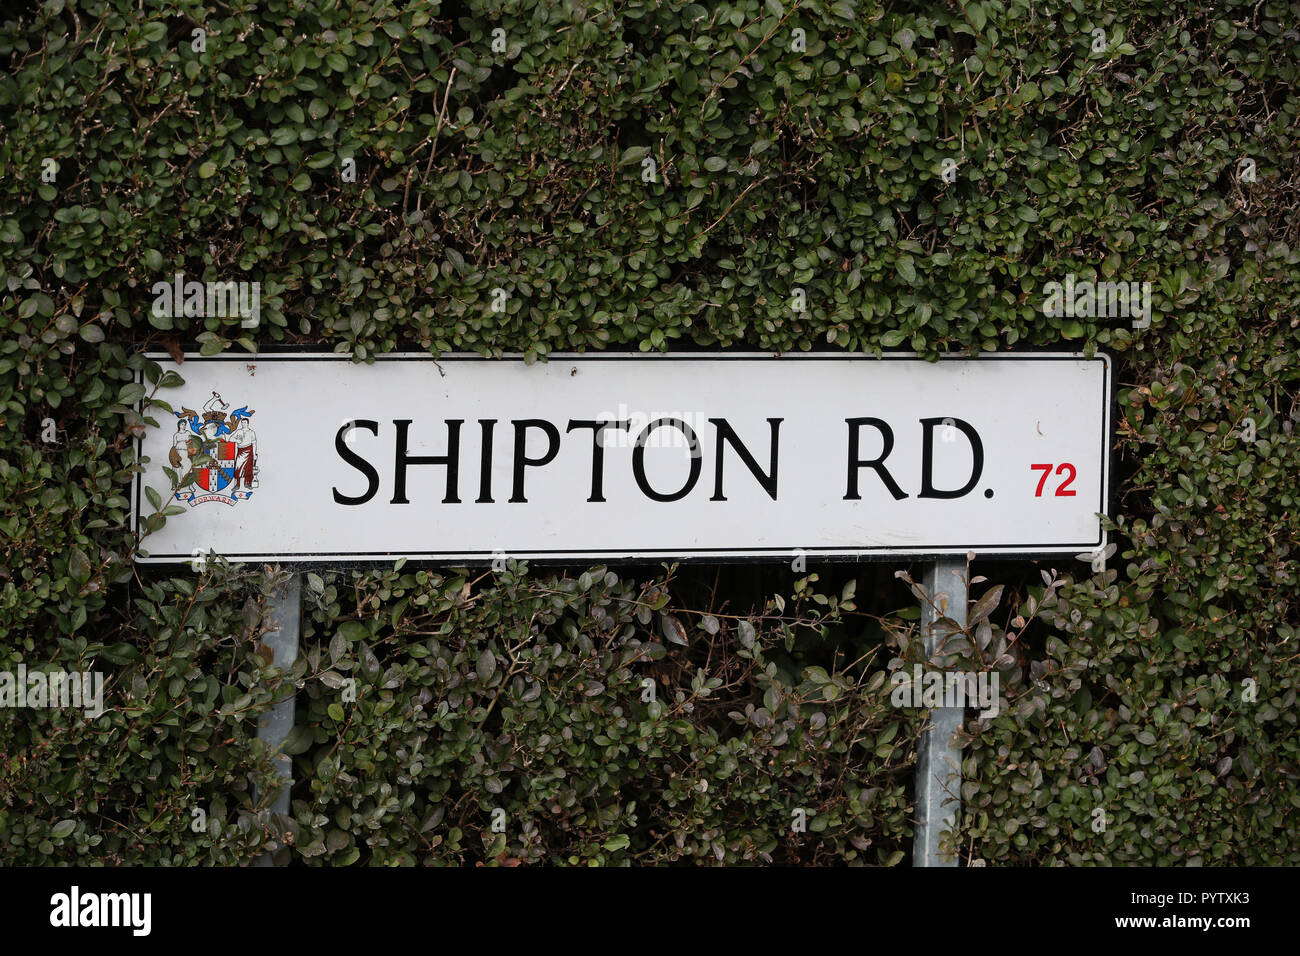 A street sign on Shipton Road in Sutton Coldfield, West Midlands where police have begun a search in the back garden of a property for the body of Suzy Lamplugh who went missing in 1986. Stock Photo